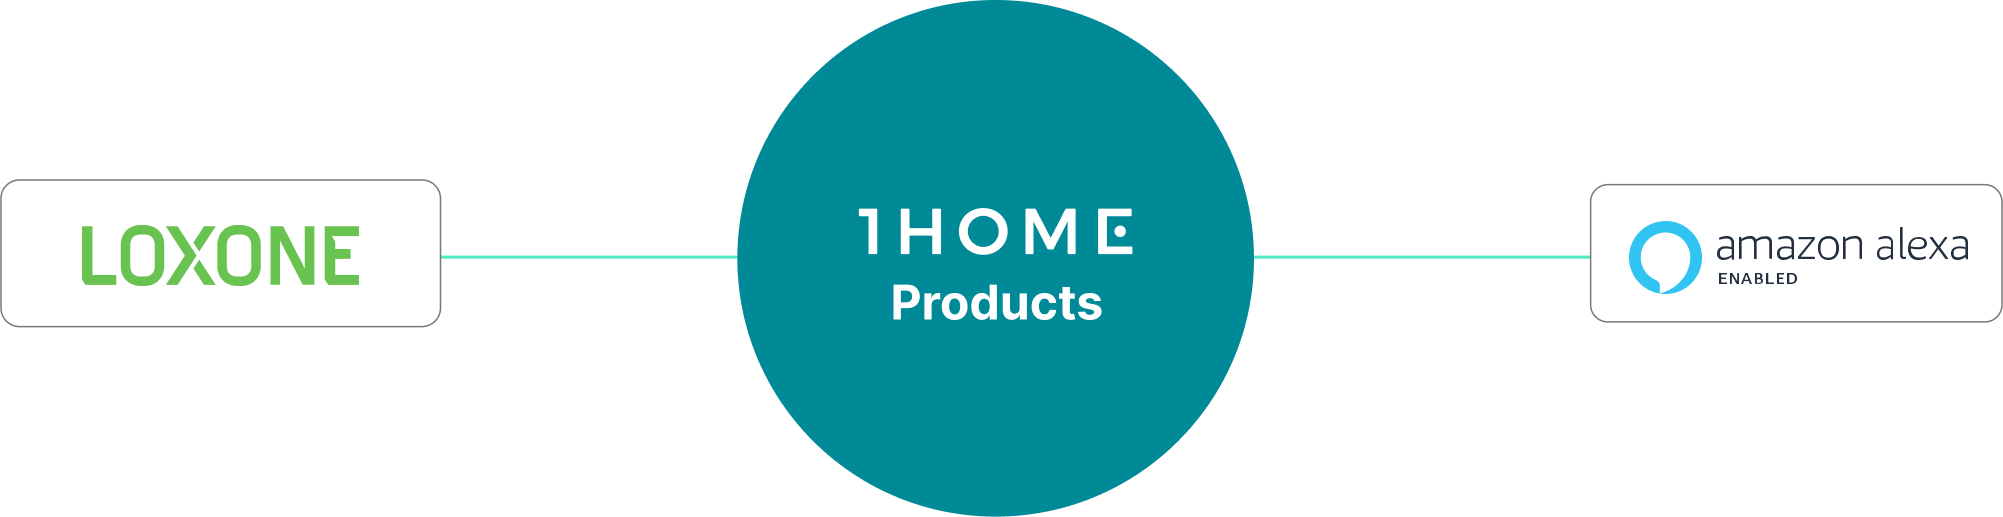 Alexa to Loxone connection made simple with 1Home